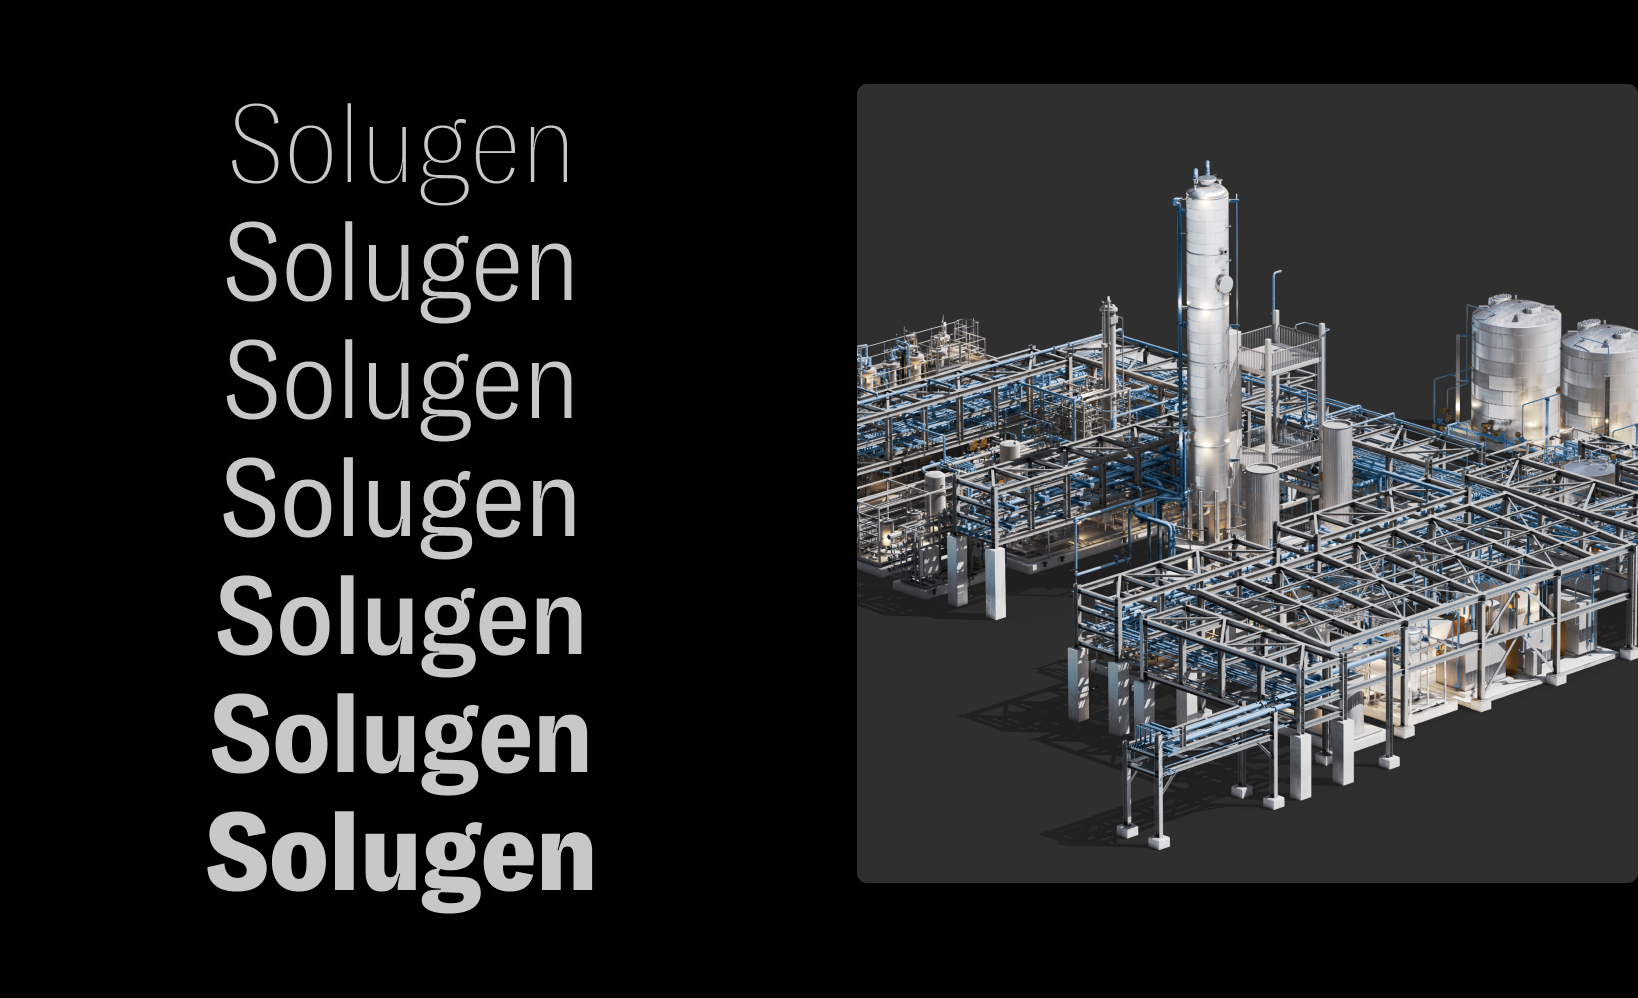 A grid of Solugen's typography and a 3D rendering of Solugen's factory